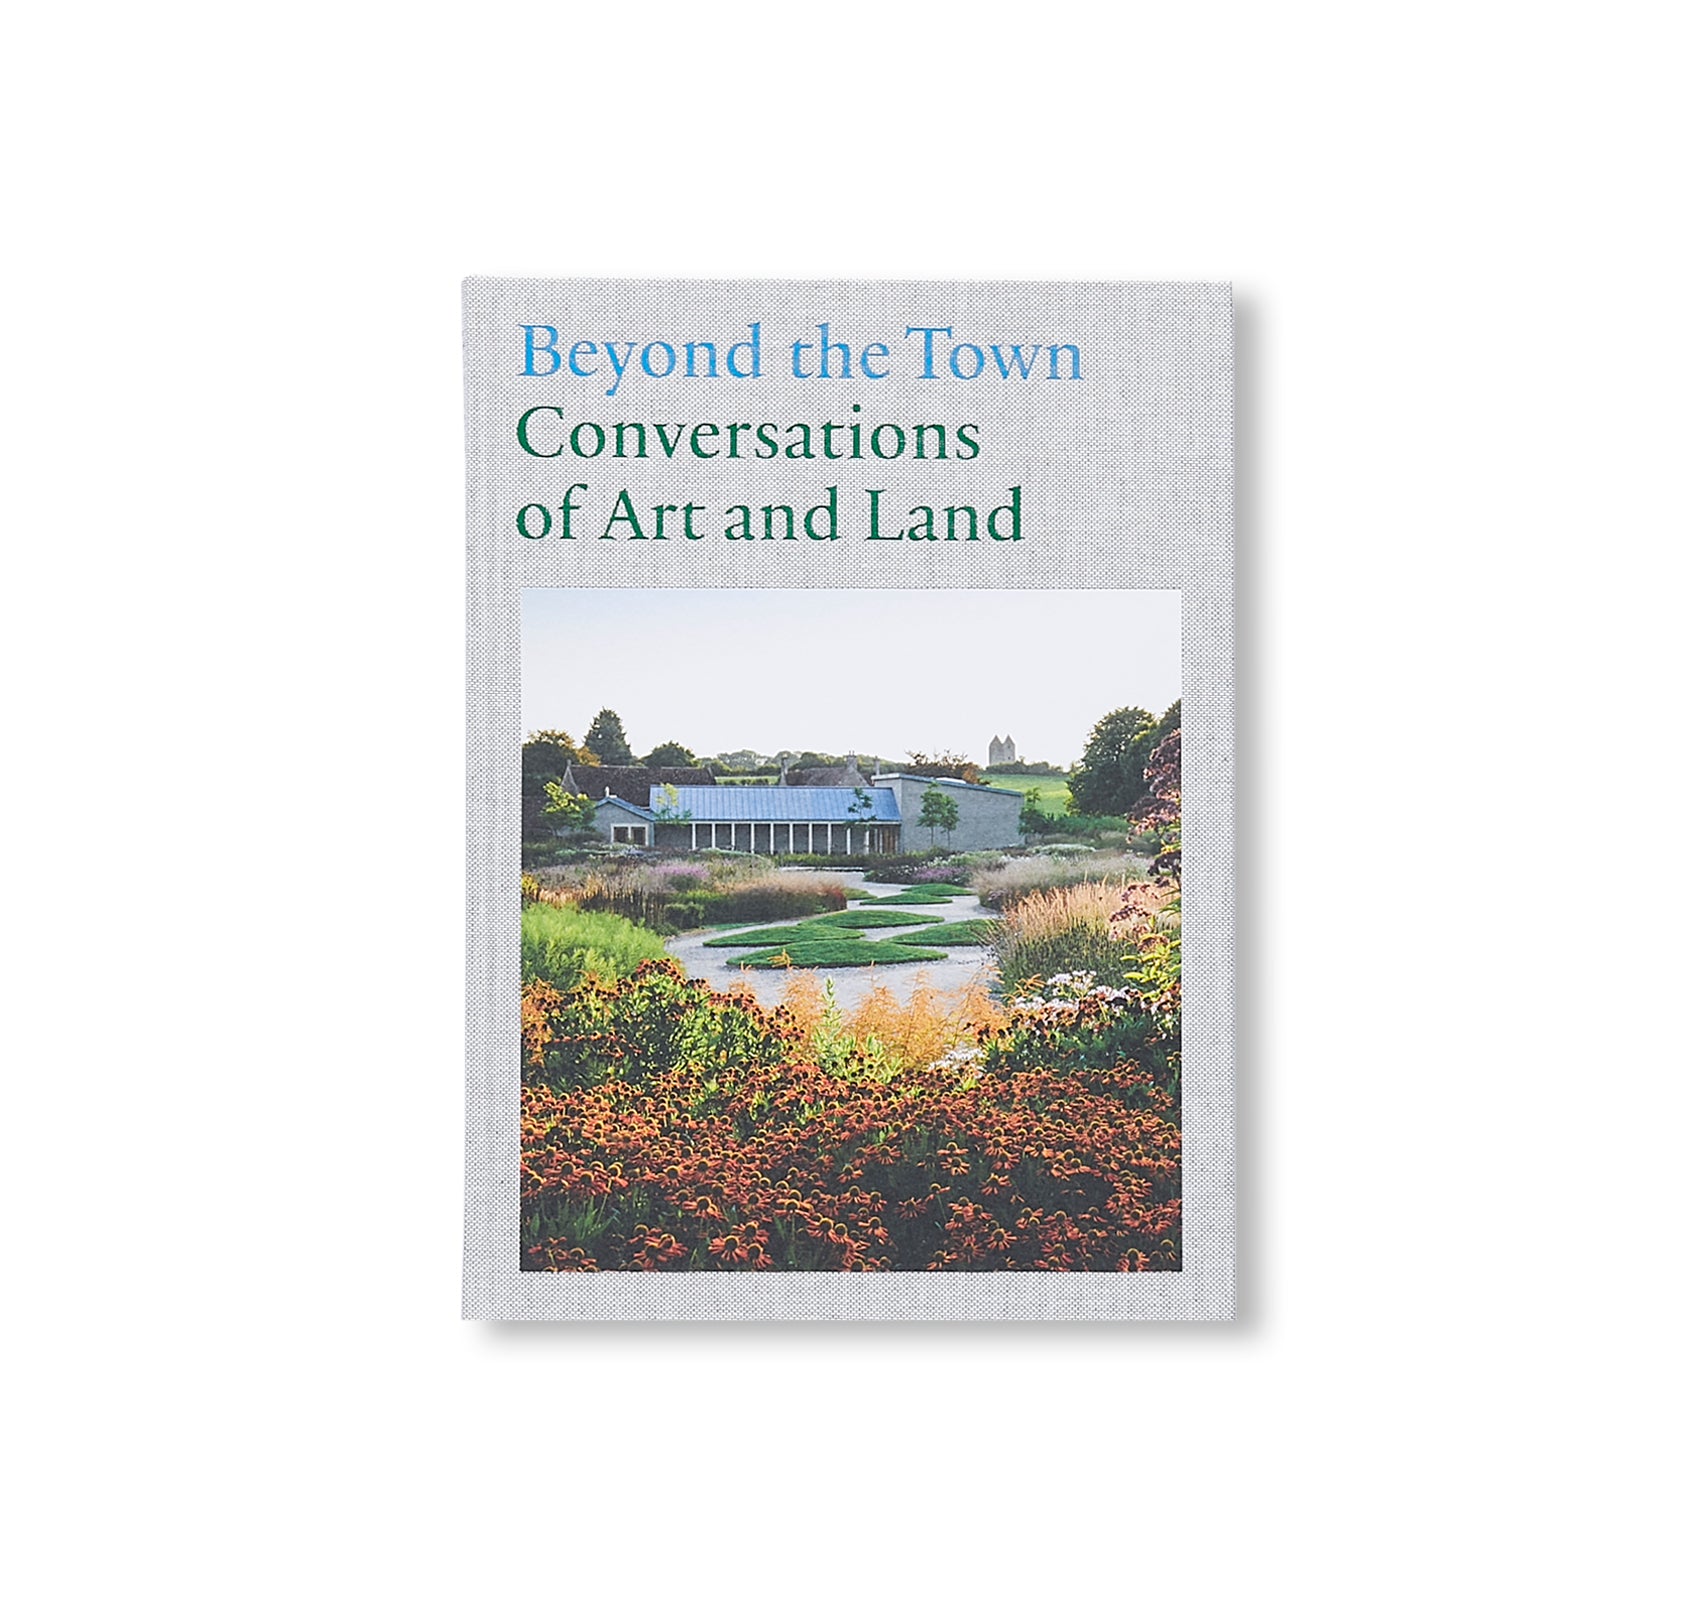 BEYOND THE TOWN: CONVERSATIONS OF ART AND LAND